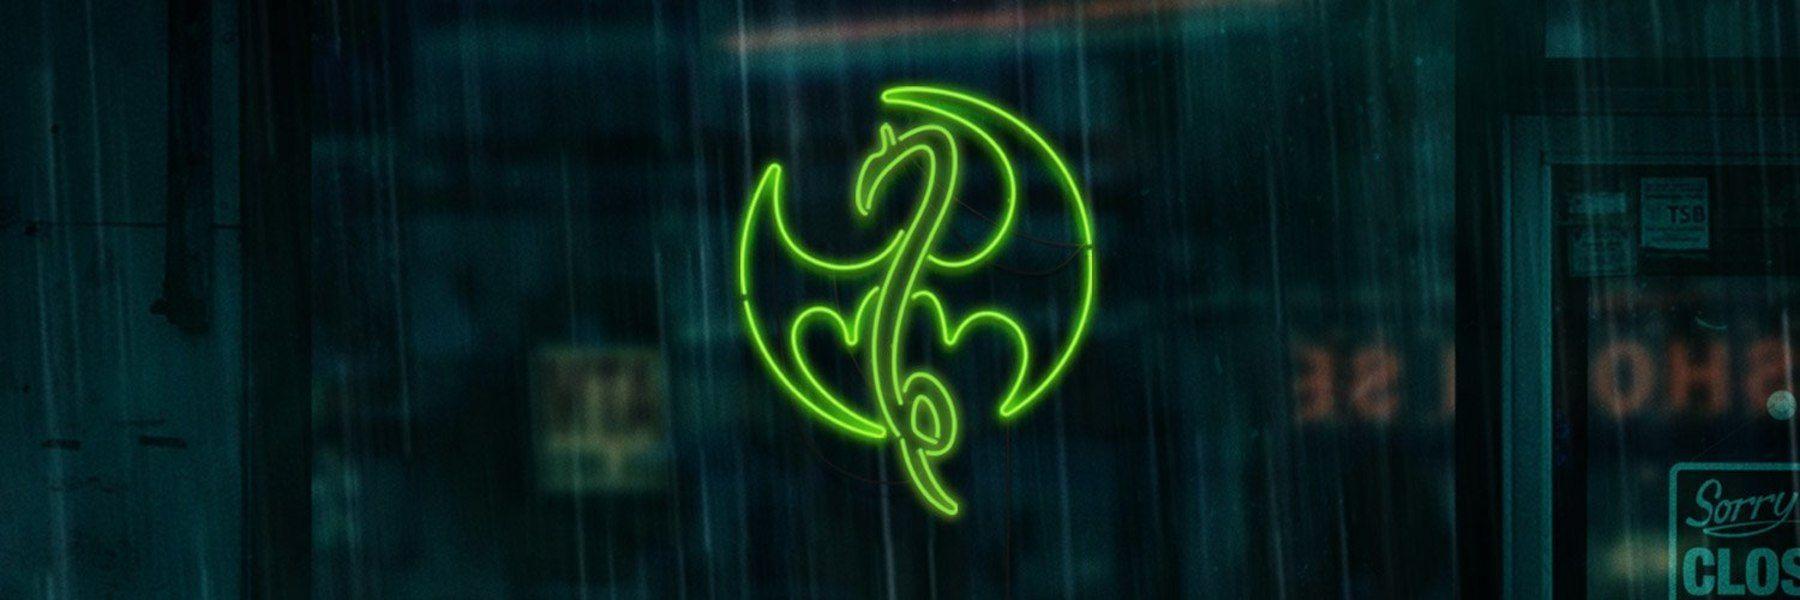 #SDCC18 - #Marvel's Iron Fist Season Two Release Date & Teaser